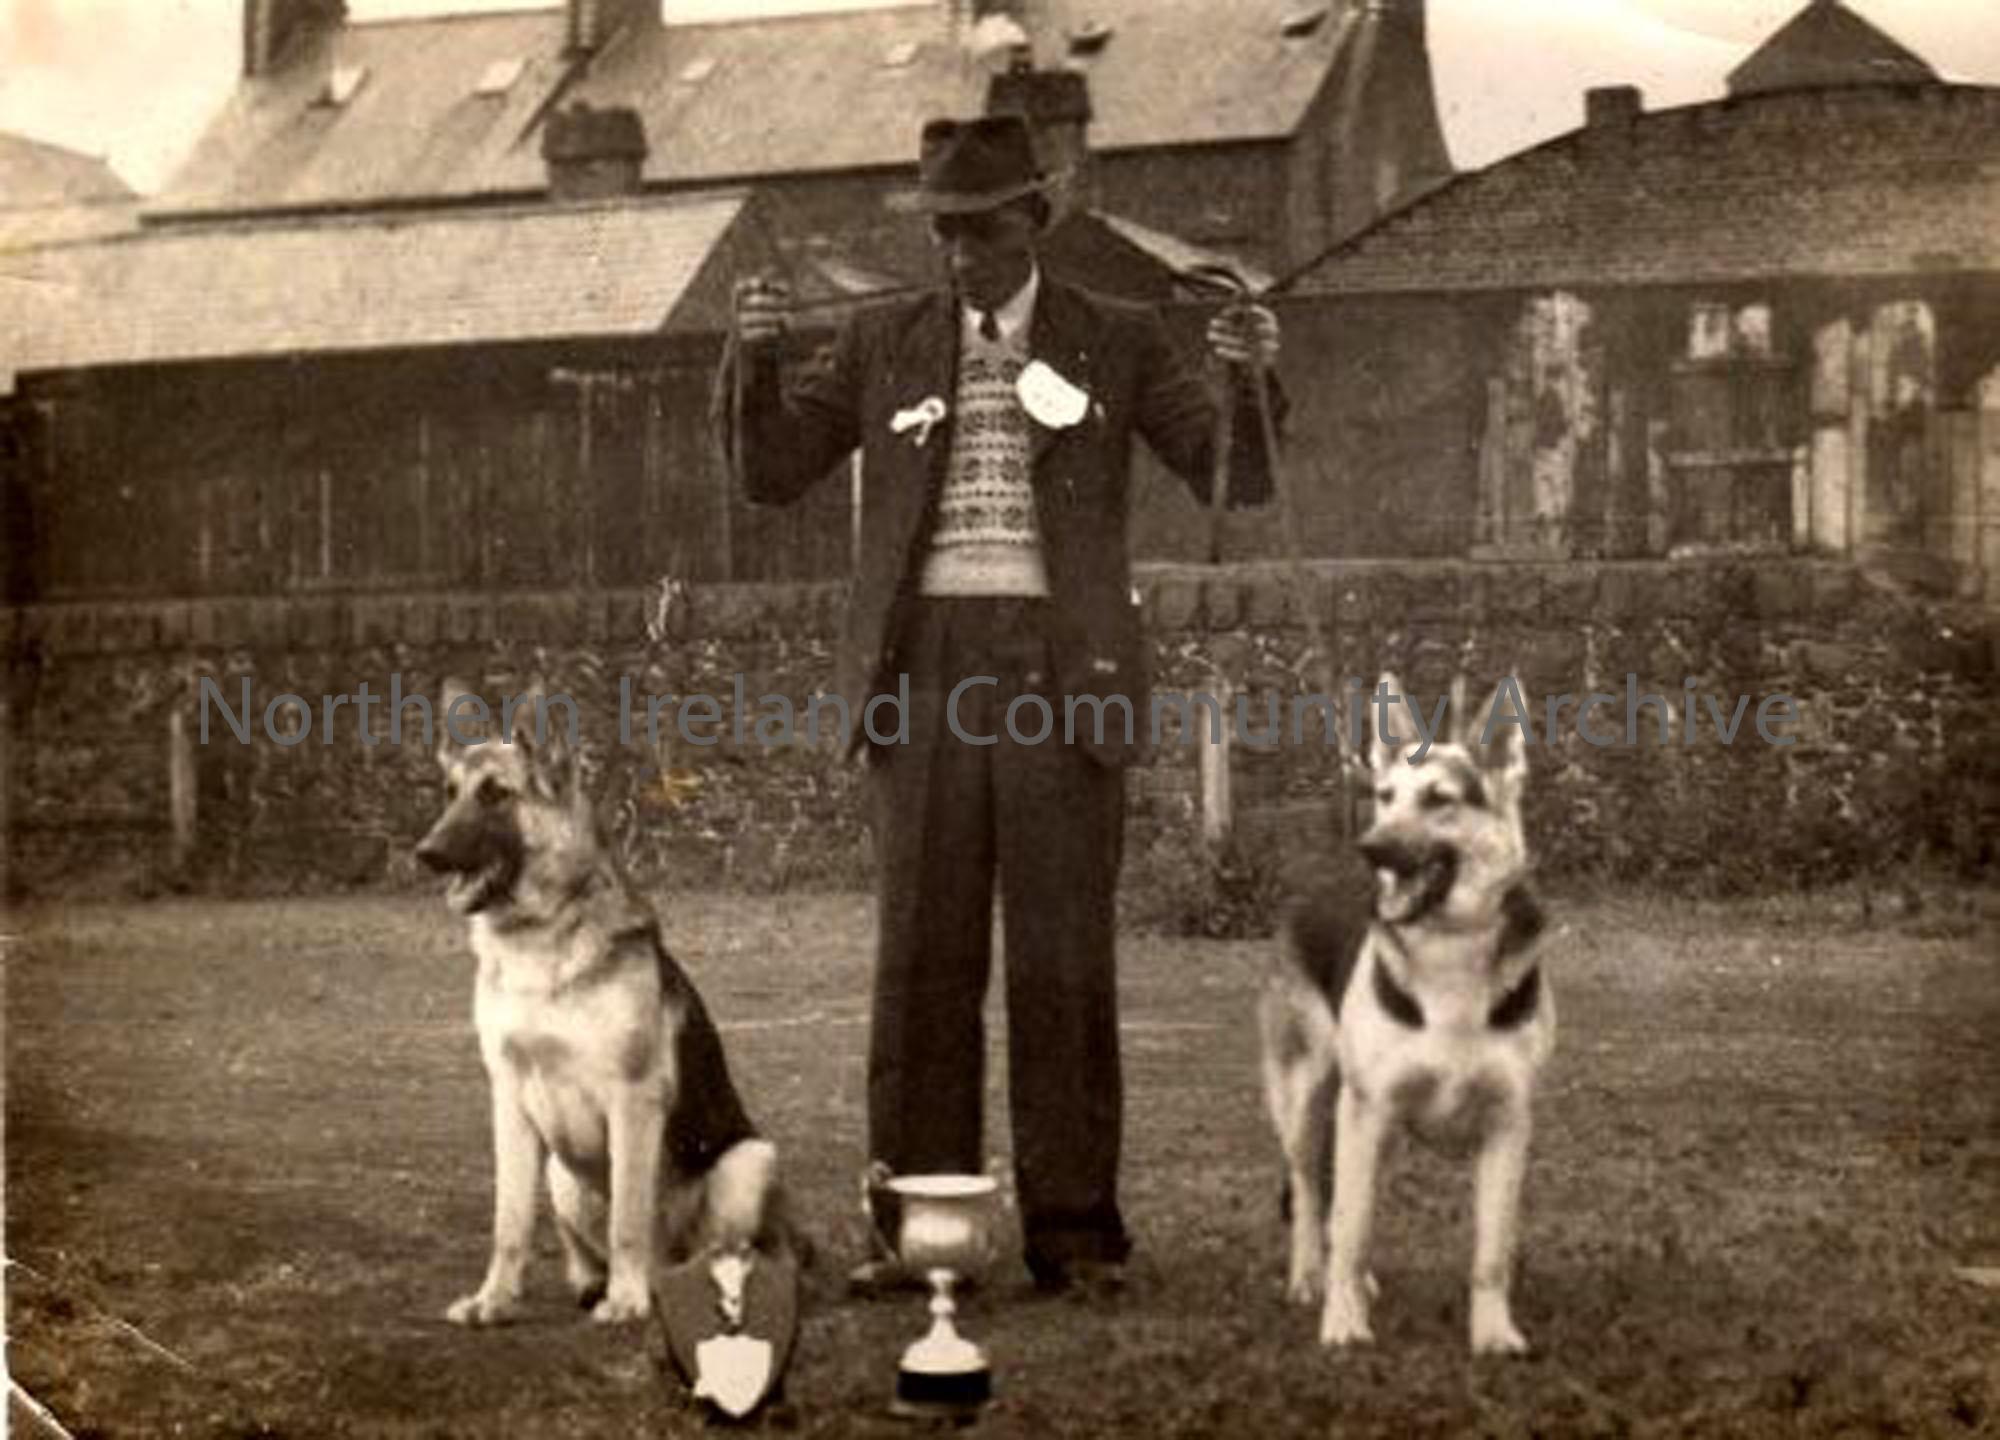 John Ross with two alsatians belonging to Willie Murphy at the Dublin show. (5247)